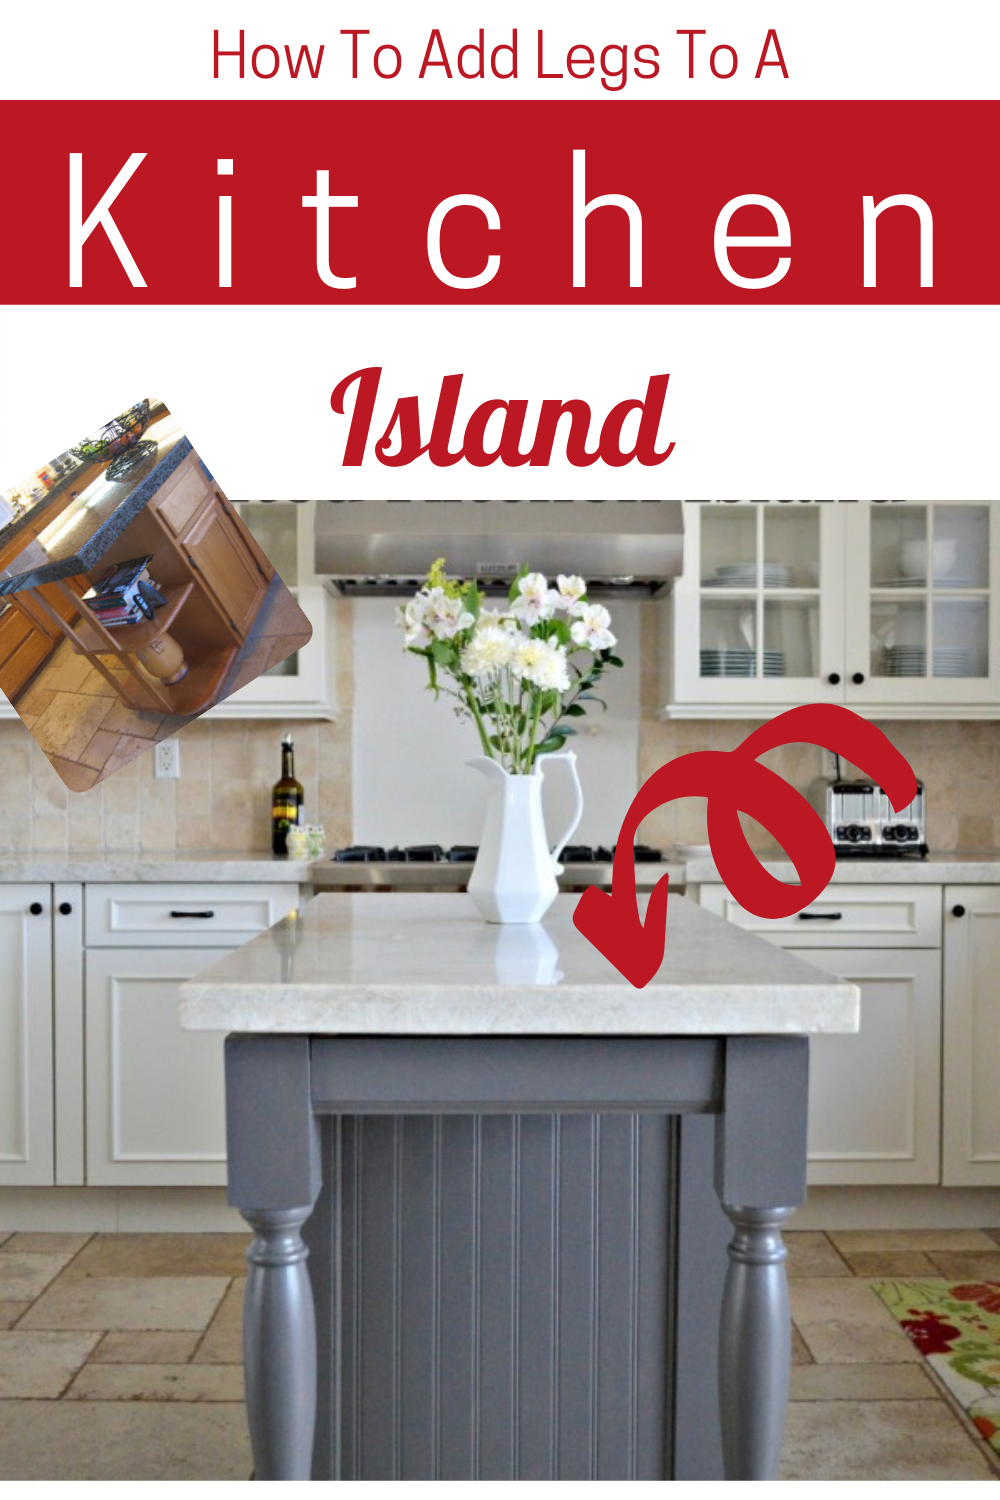 How to add legs to a kitchen island